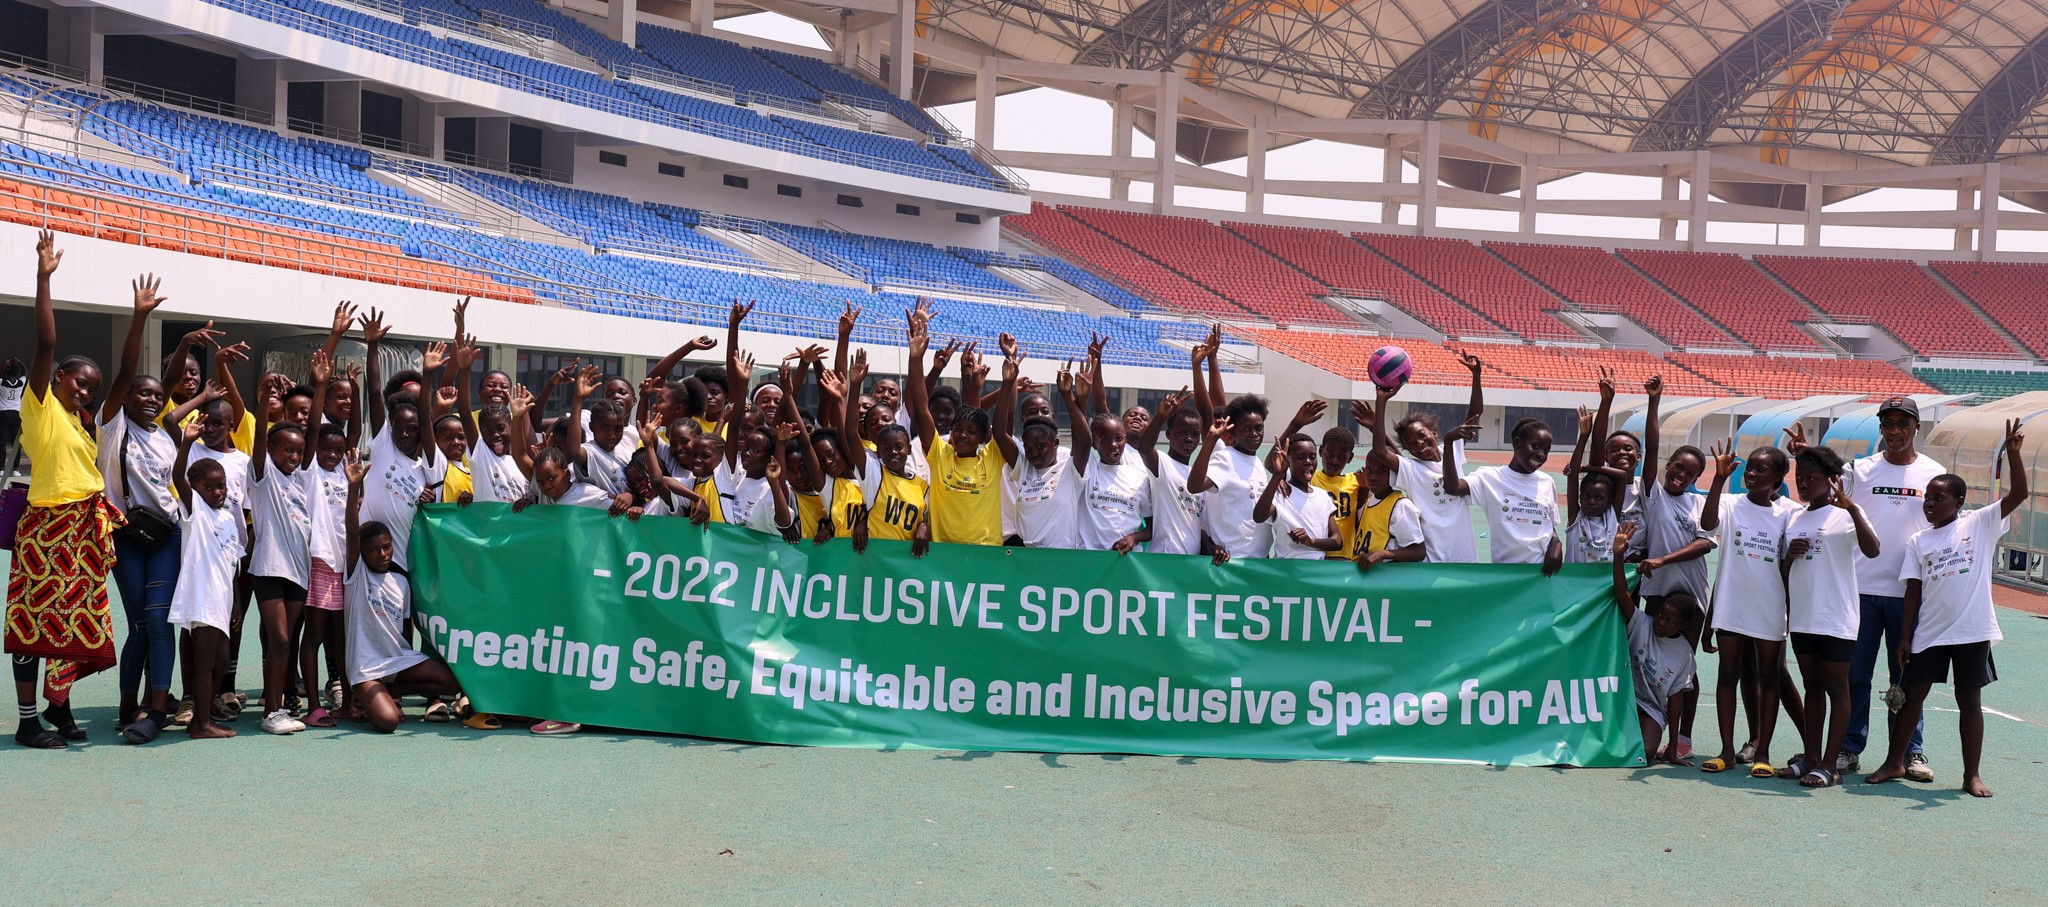 Around 600 participants take part in NOC of Zambia's Norway-backed Inclusive Sports Festival